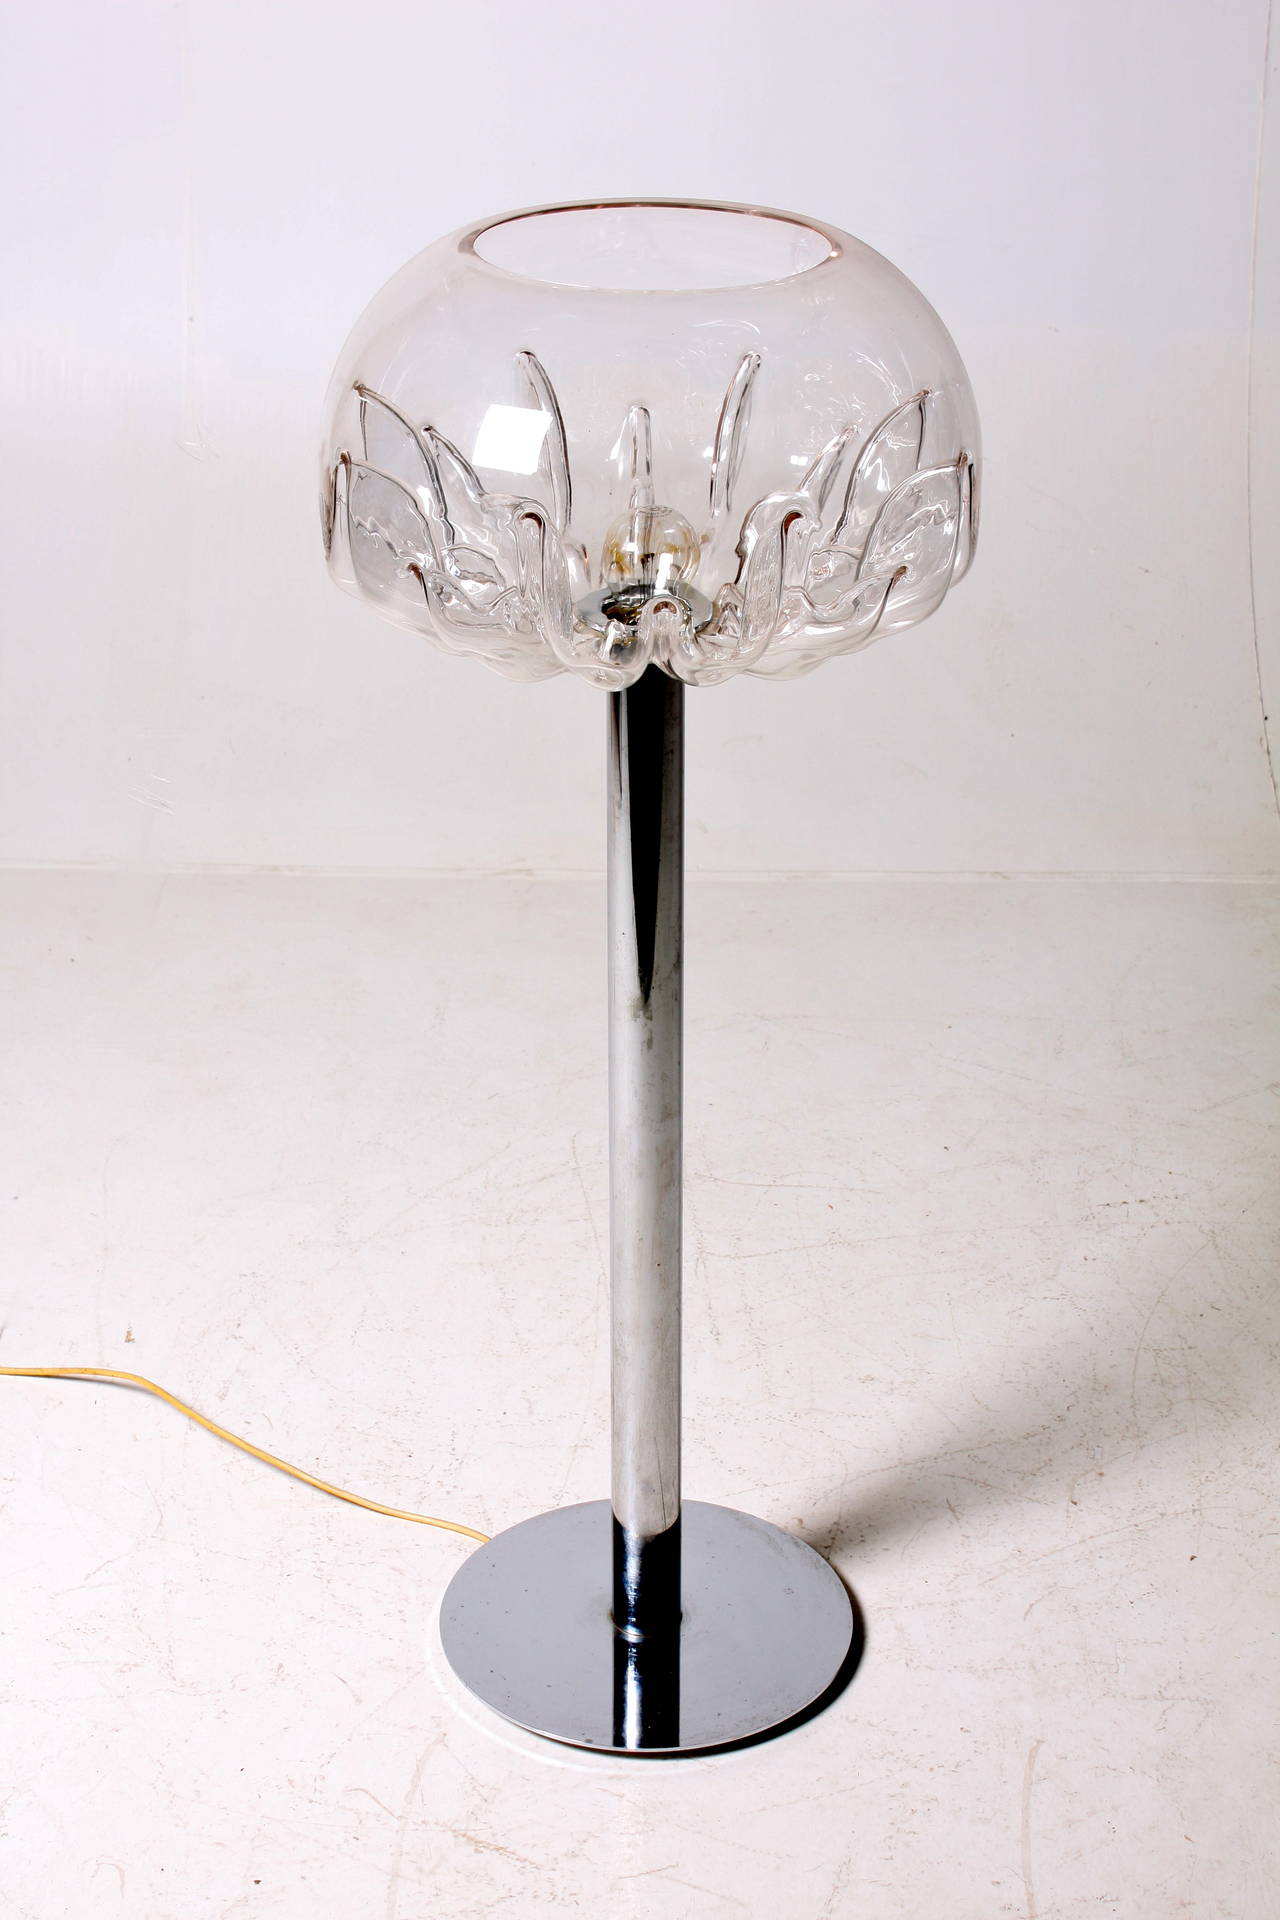 Floor lamp with a bowl shade in art glass on a chromed metal base - Made in Sweden in the 1960's Great original condition.